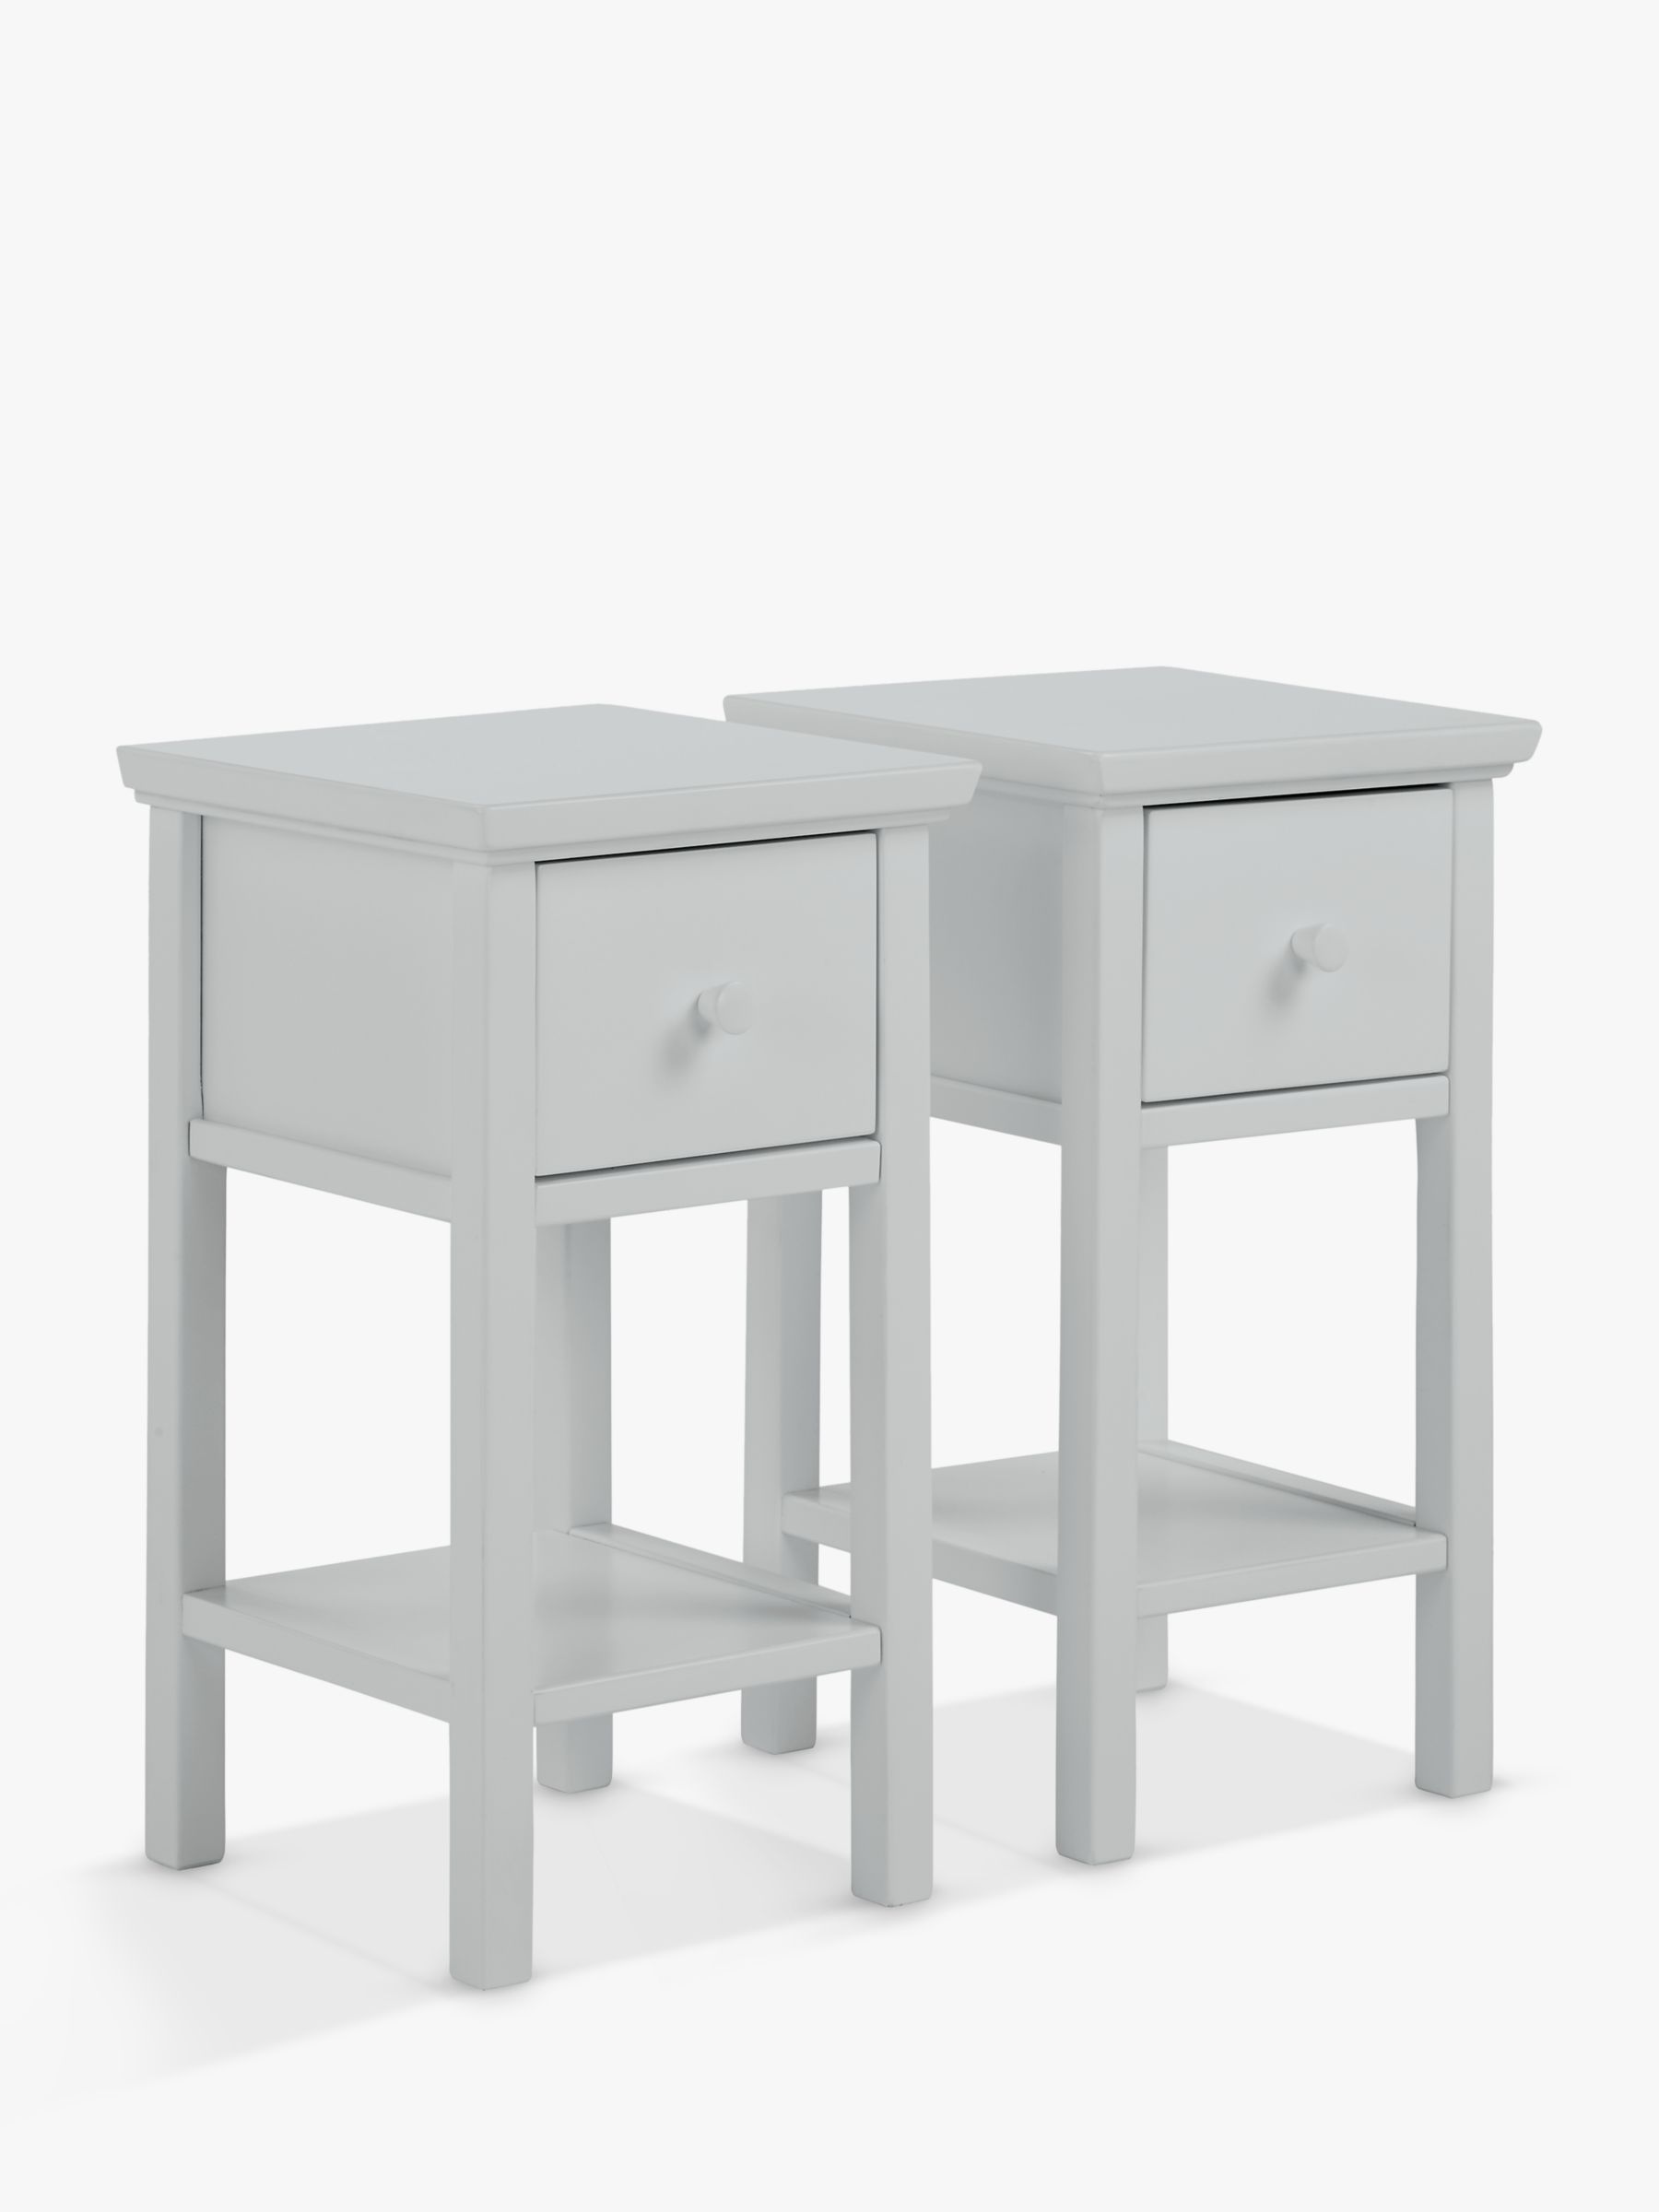 Photo of John lewis anyday wilton bedside tables set of 2